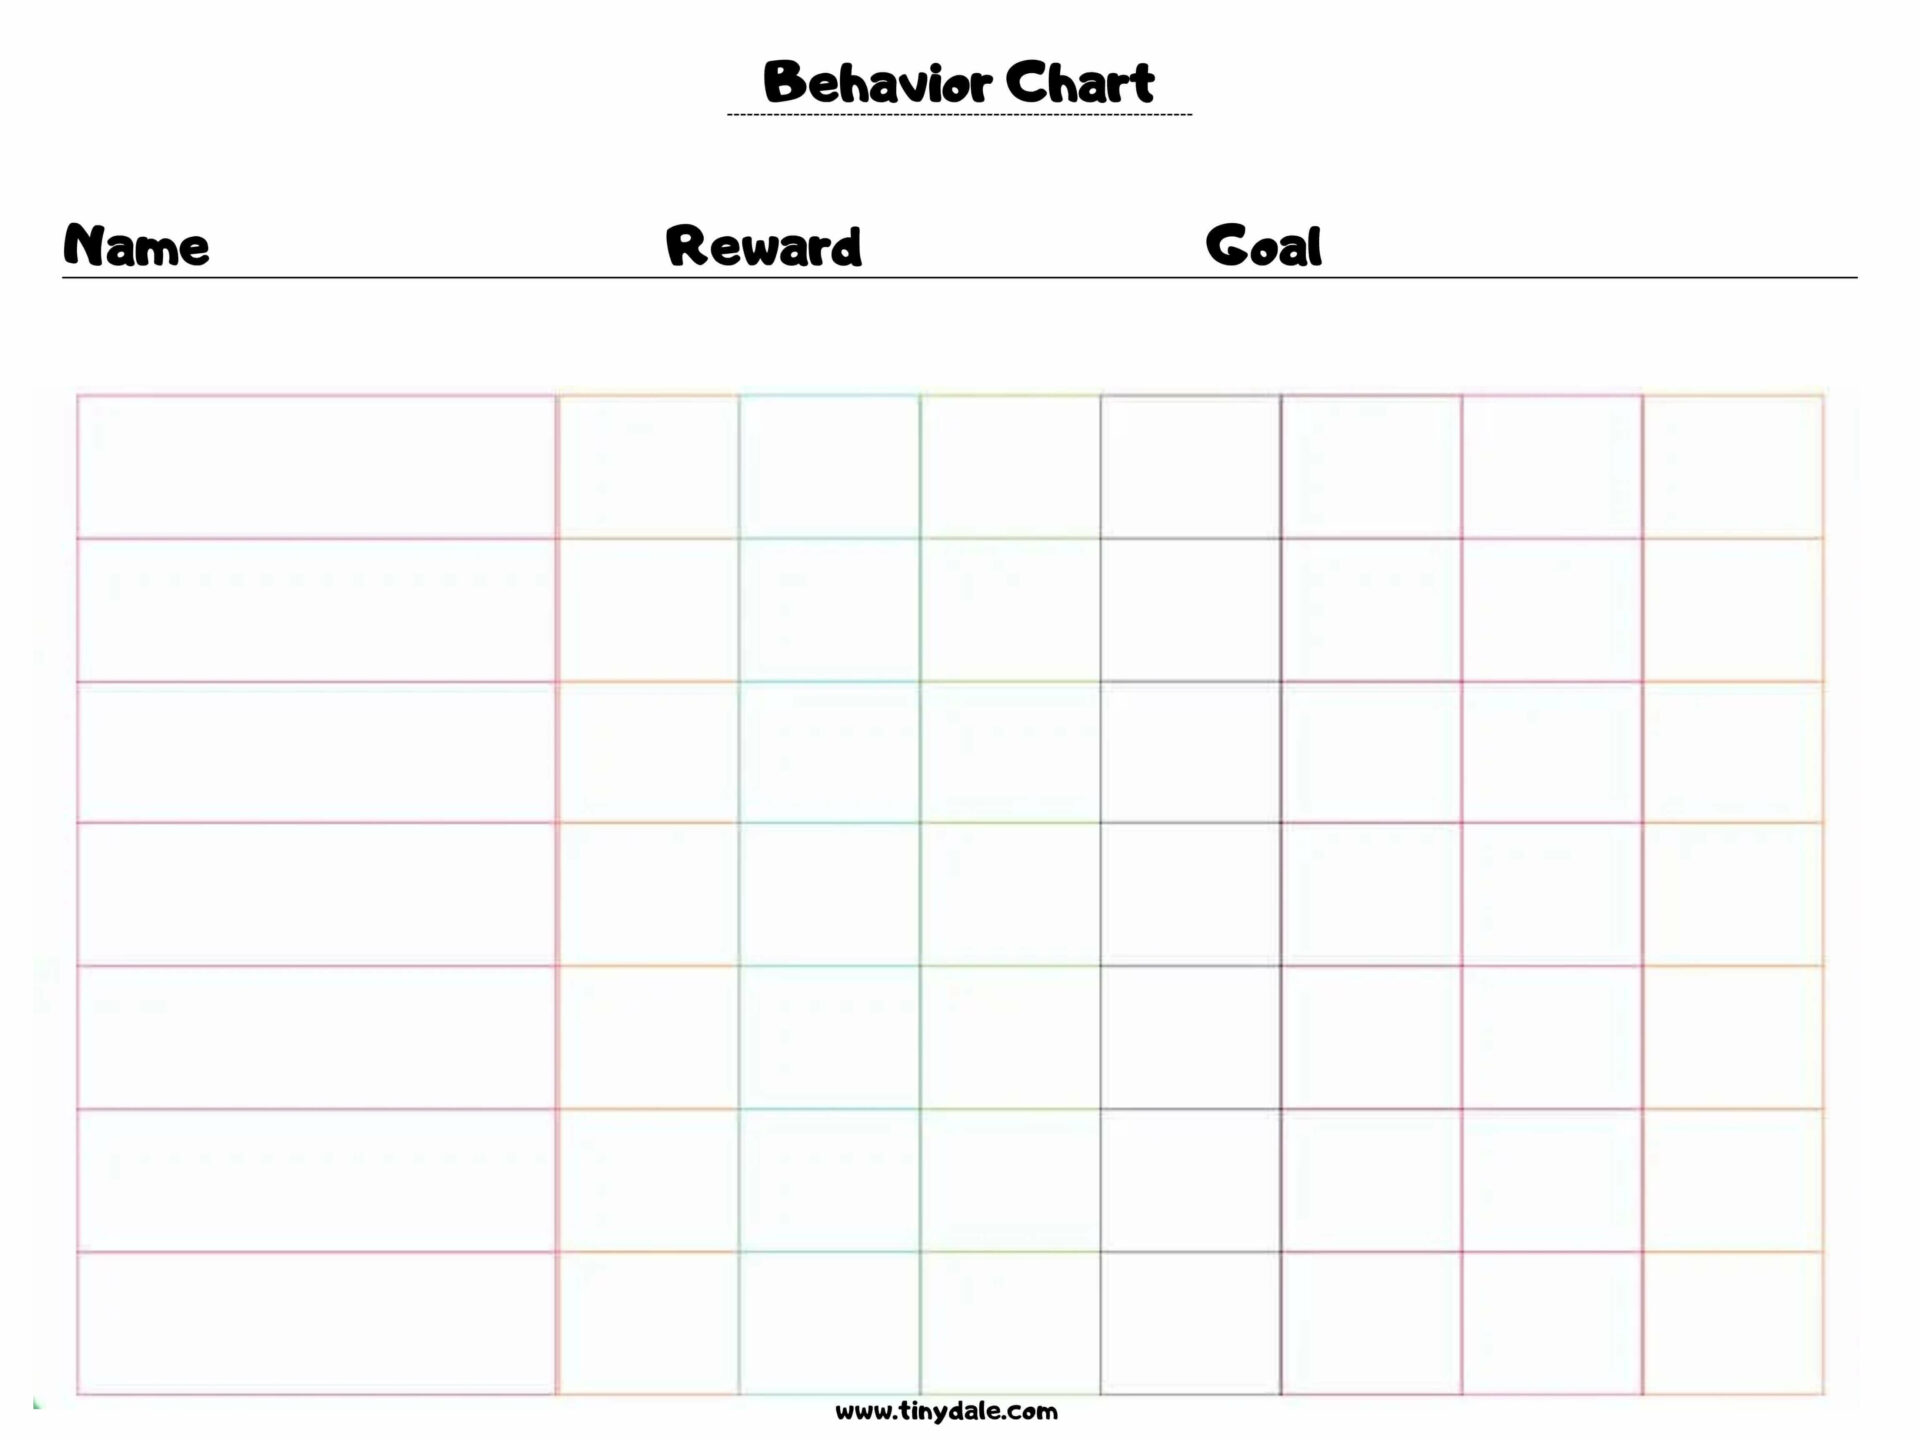 All About Behavior Chart For Children! (Free Printable Inside)